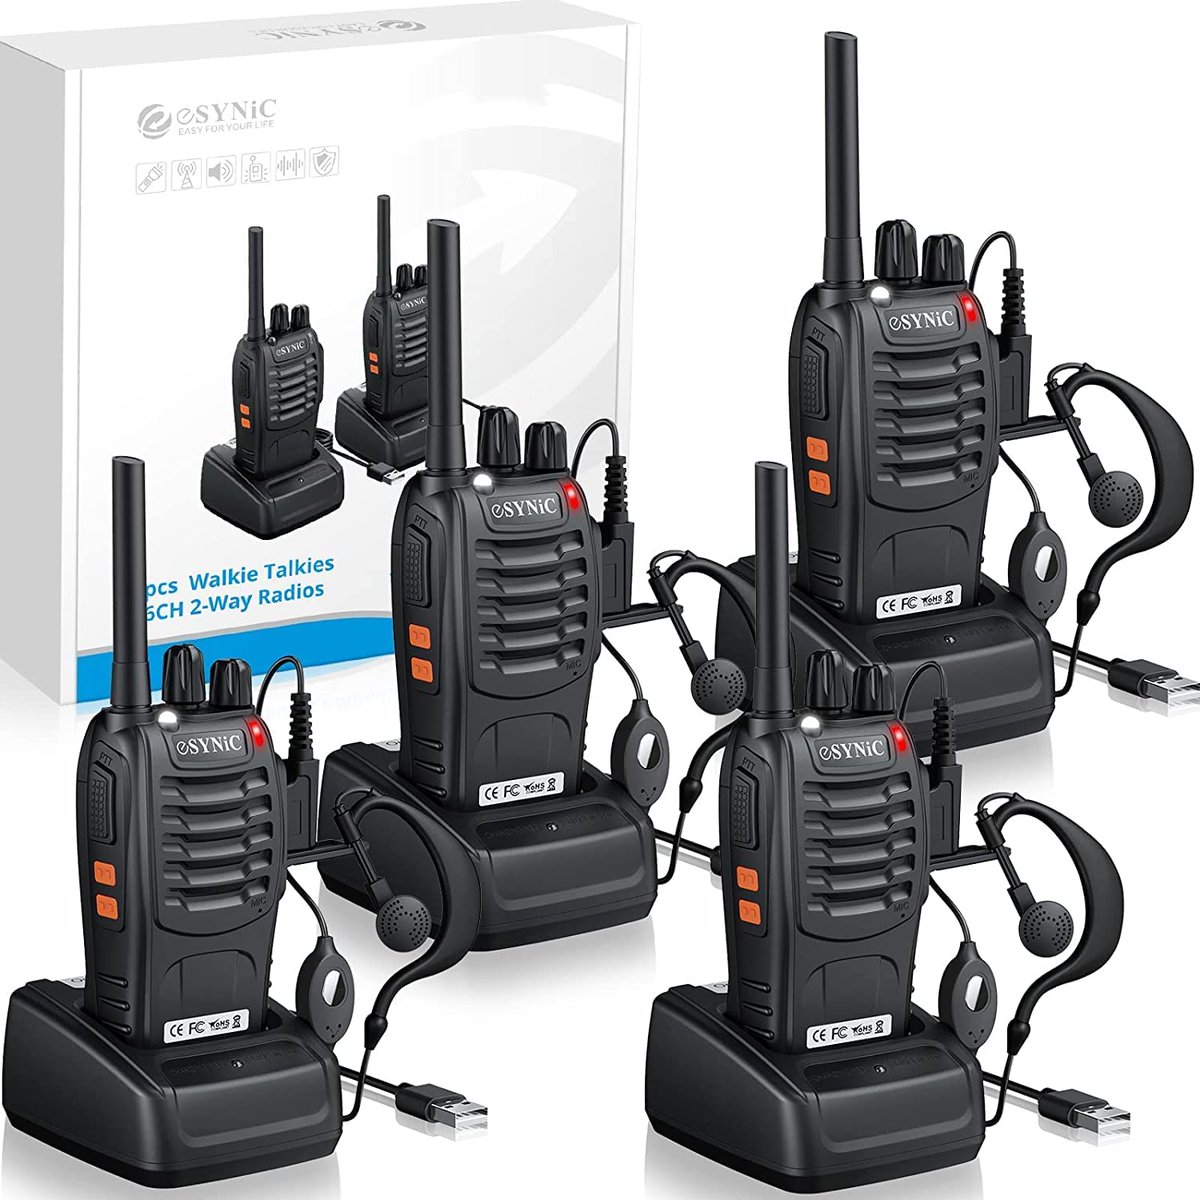 Two way radio and hand held transceiver with long range capabilities up to 6km. Each radio comes with a charger. Packaged as a pair ☎️0712581561 @ Ksh 3500
'At 18'
#TokensBilaCharges
Kairo
'Monica Juma'
'Saba Saba'
'Royal Media Services'
#MissionImpossible📷
Nanyuki
Raila
IELTS